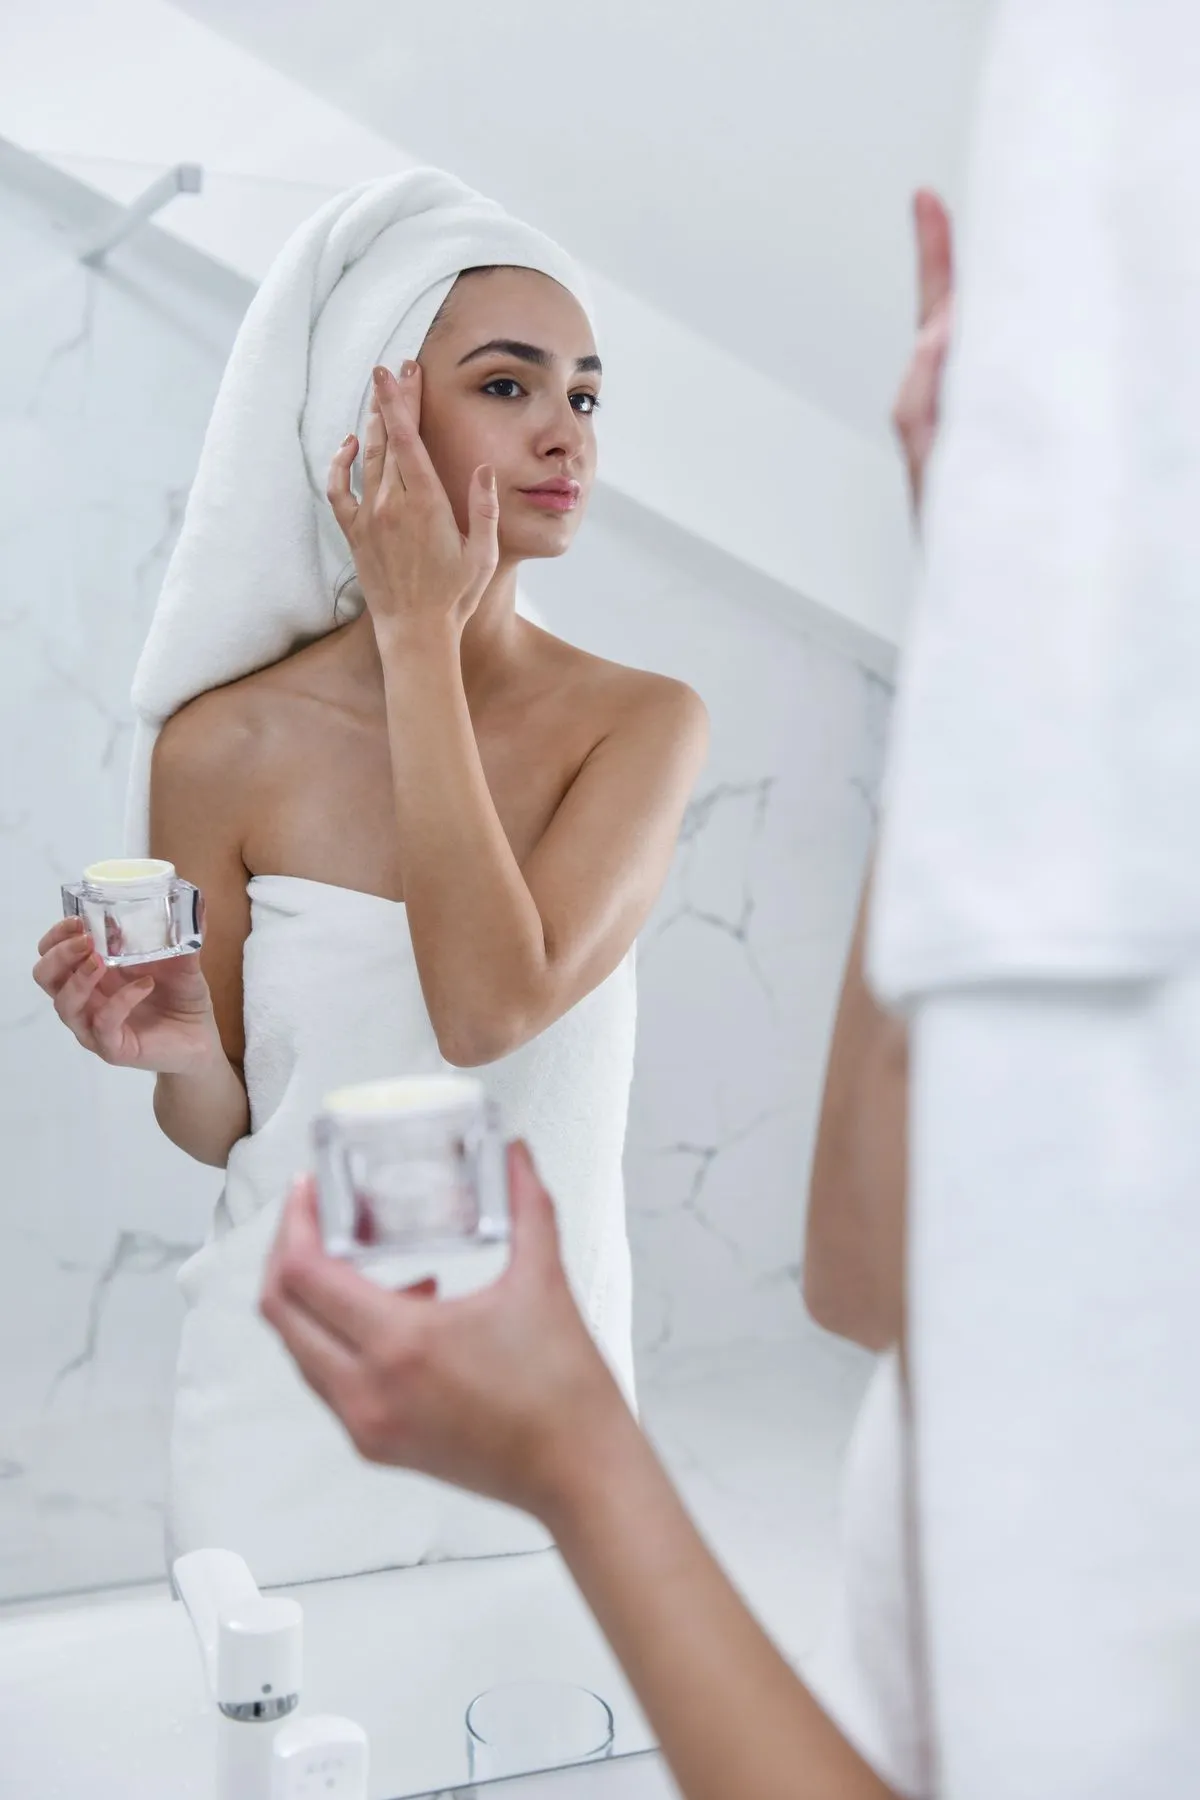 Discover The Best Beauty Routine To Take Care Of The Skin With Facial Eczema